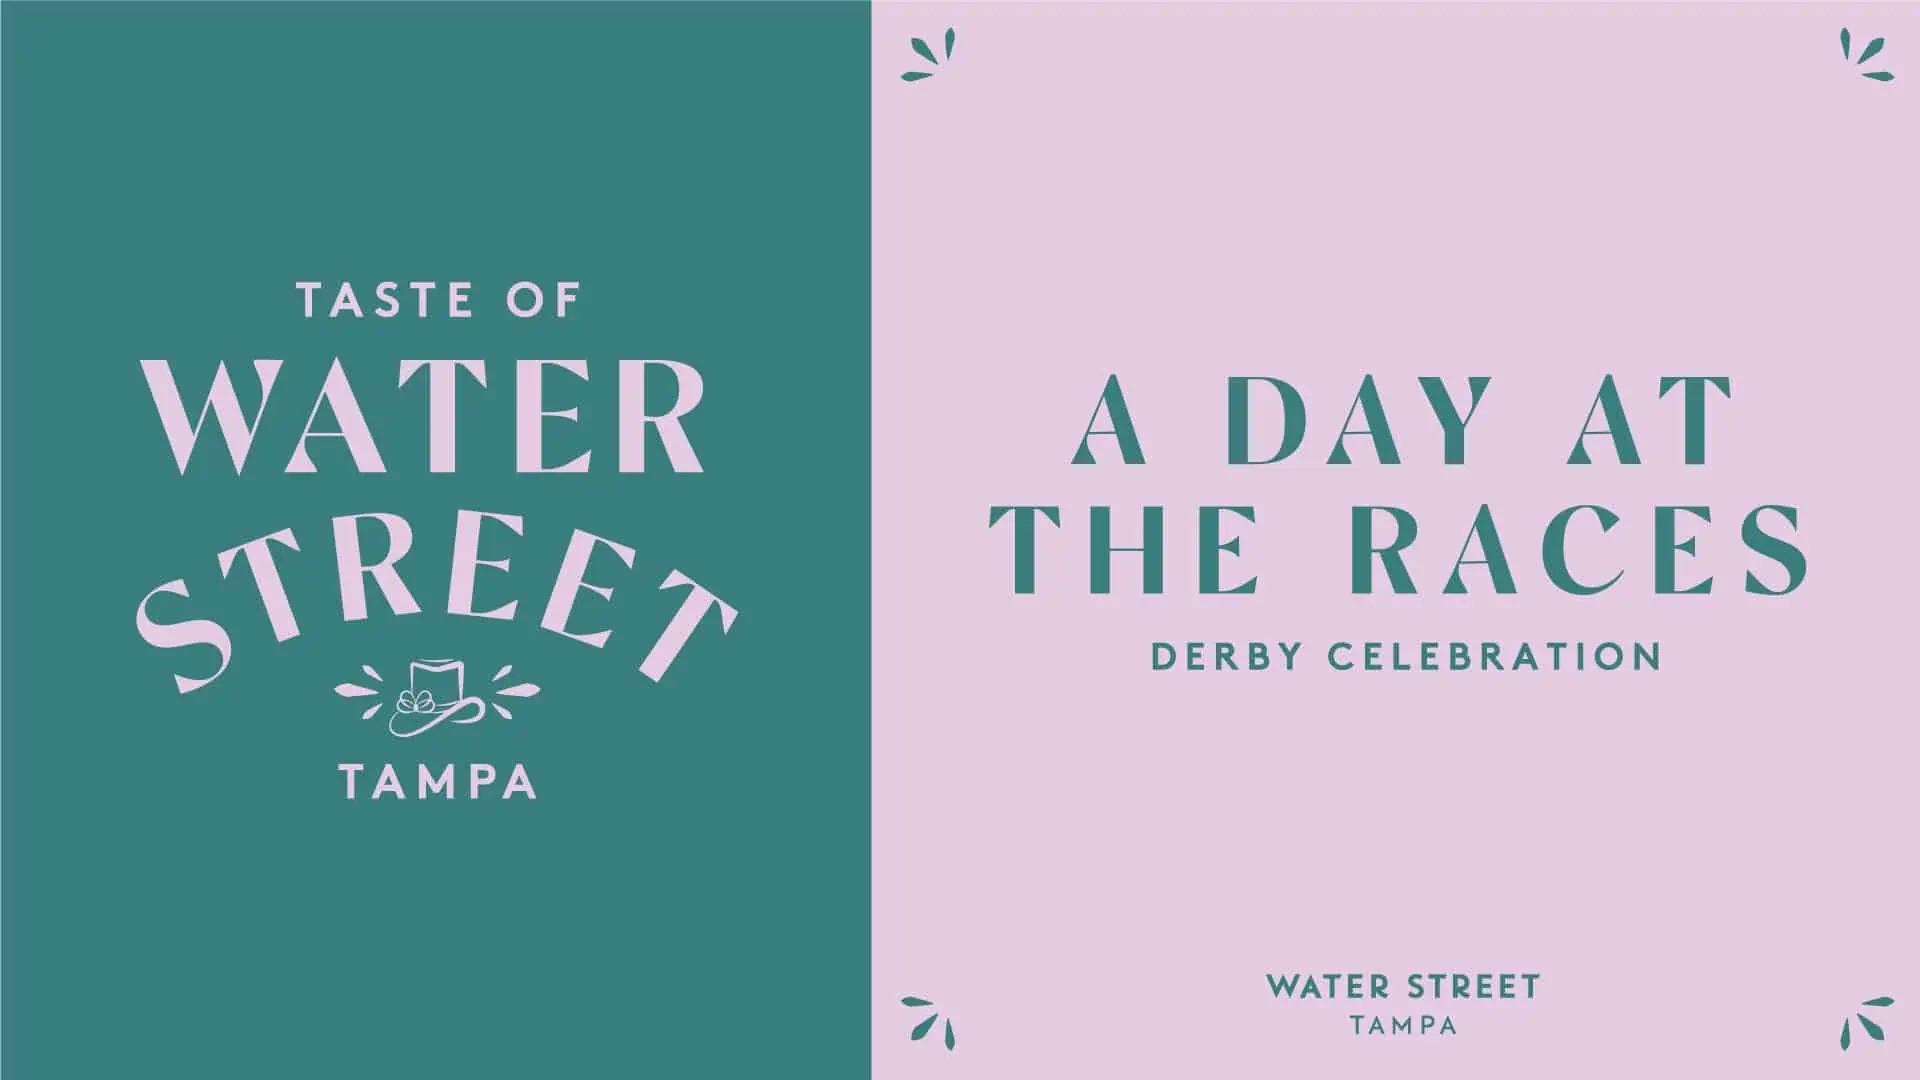 Taste of Water Street: A Day at the Races